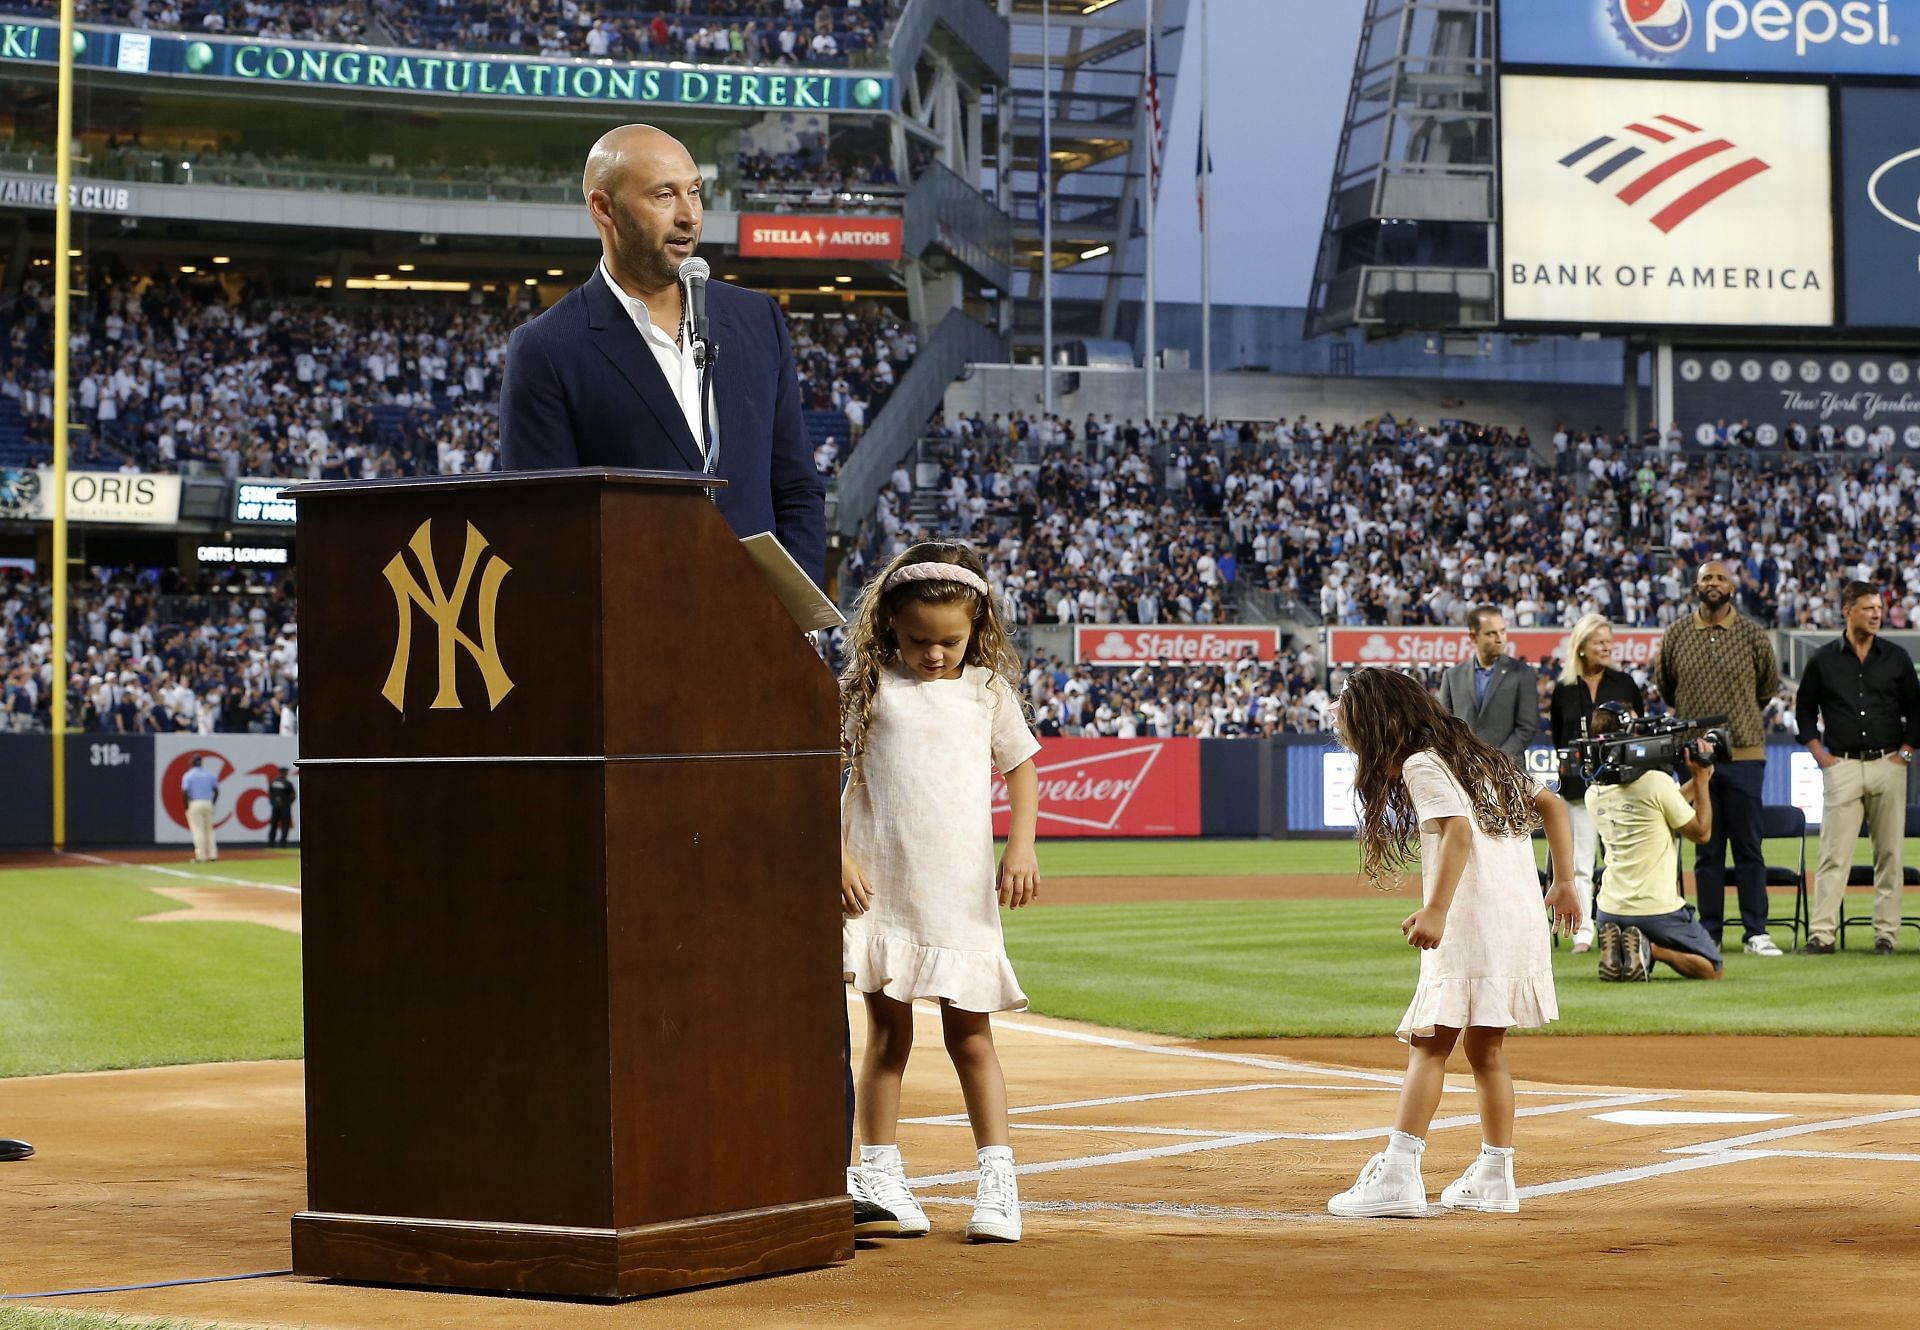 Michael Jordan Has Big Praise For MLB Legend Derek Jeter: “I Appreciate Him  As A Competitor. He Wanted No Faults In His Game. To Me, That's A  Champion.” - Fadeaway World